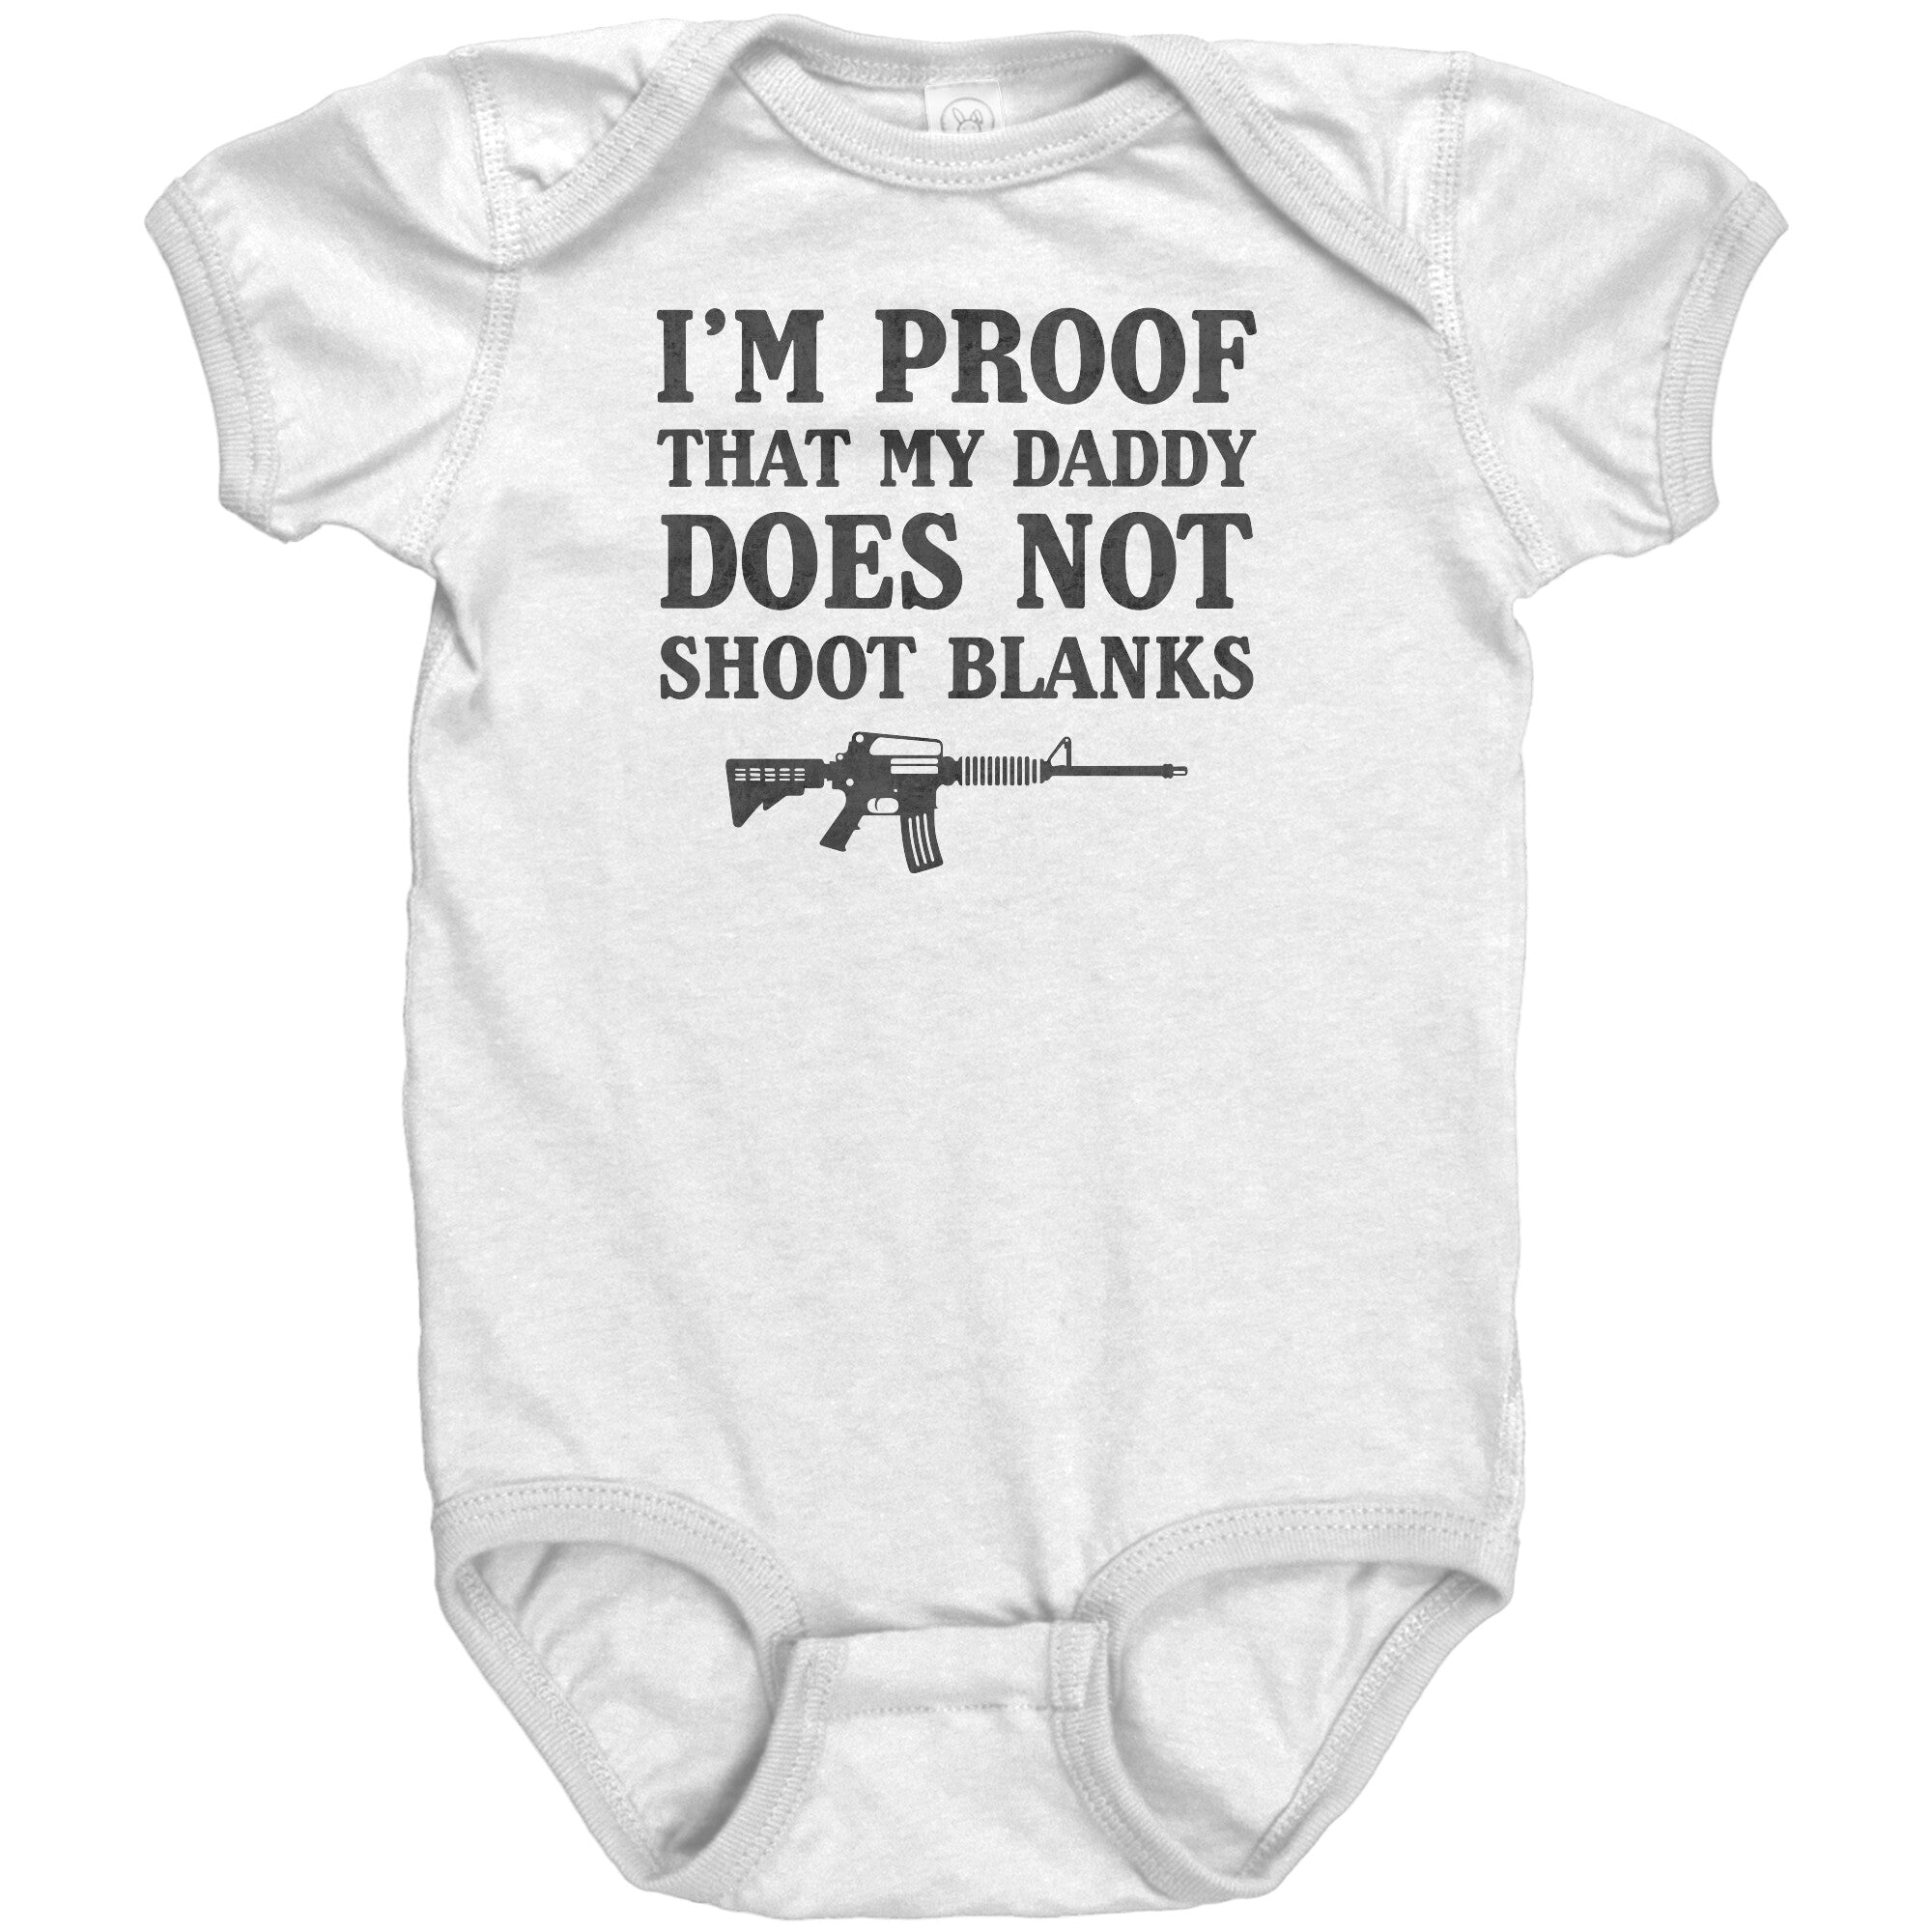 I'm Proof That My Daddy Does Not Shoot Blanks Baby Onesie -Apparel | Drunk America 